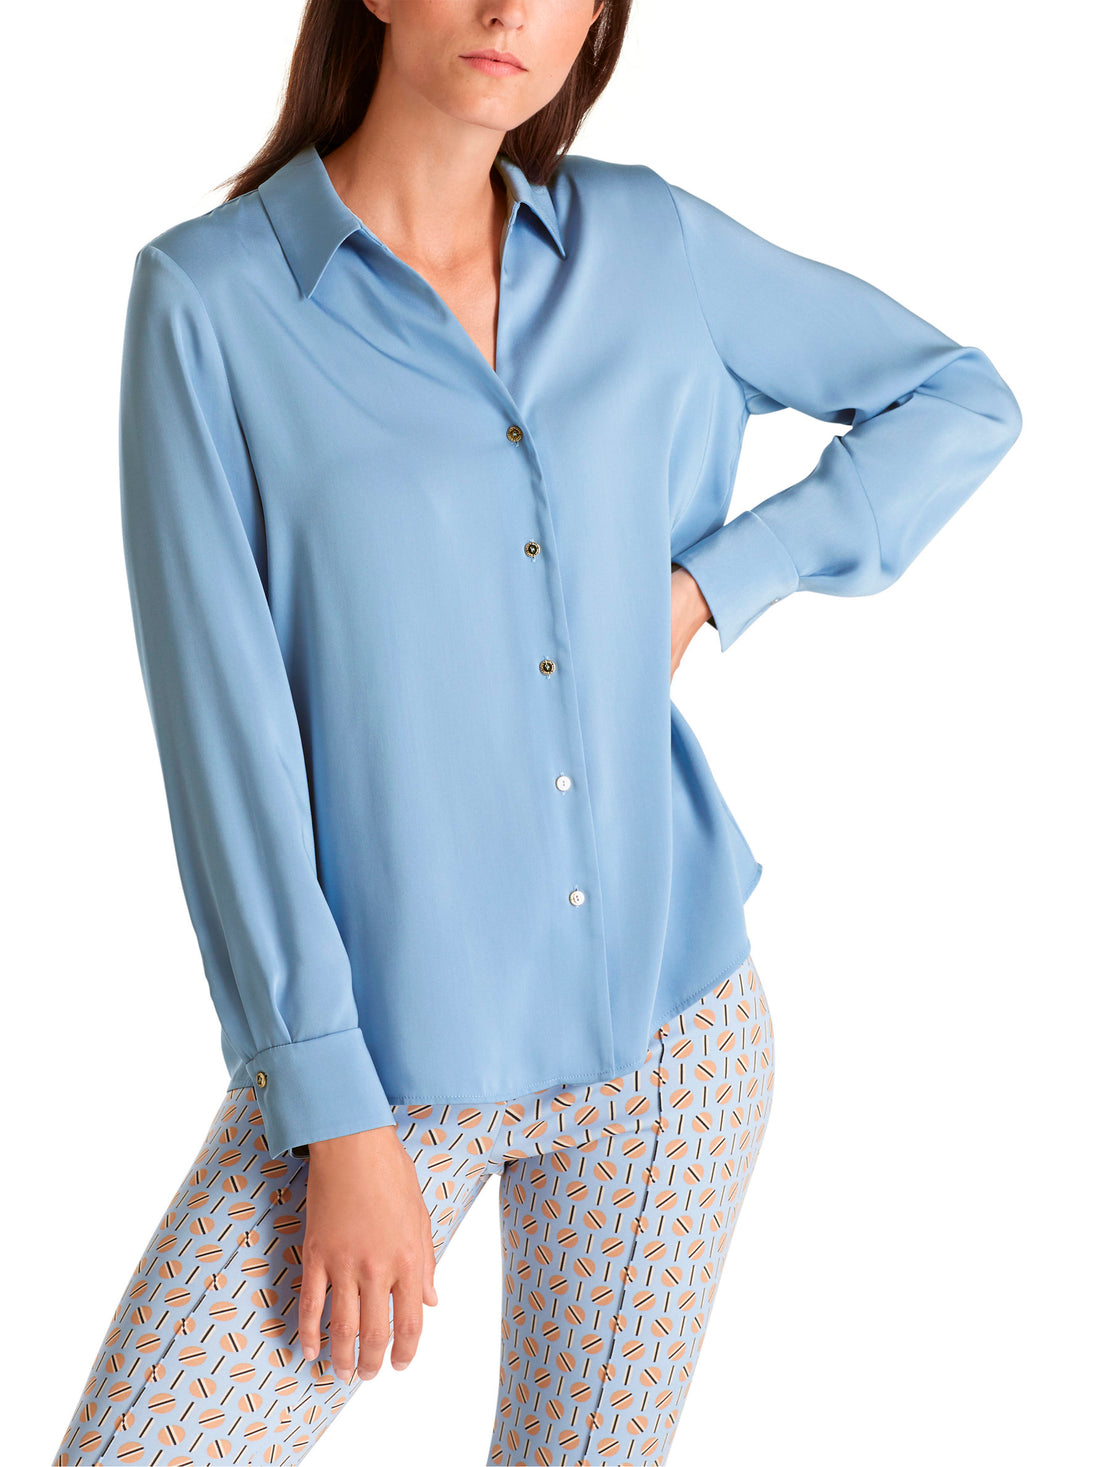 Classic Shirt Blouse With V-Neck_VC 51.26 W08_321_01